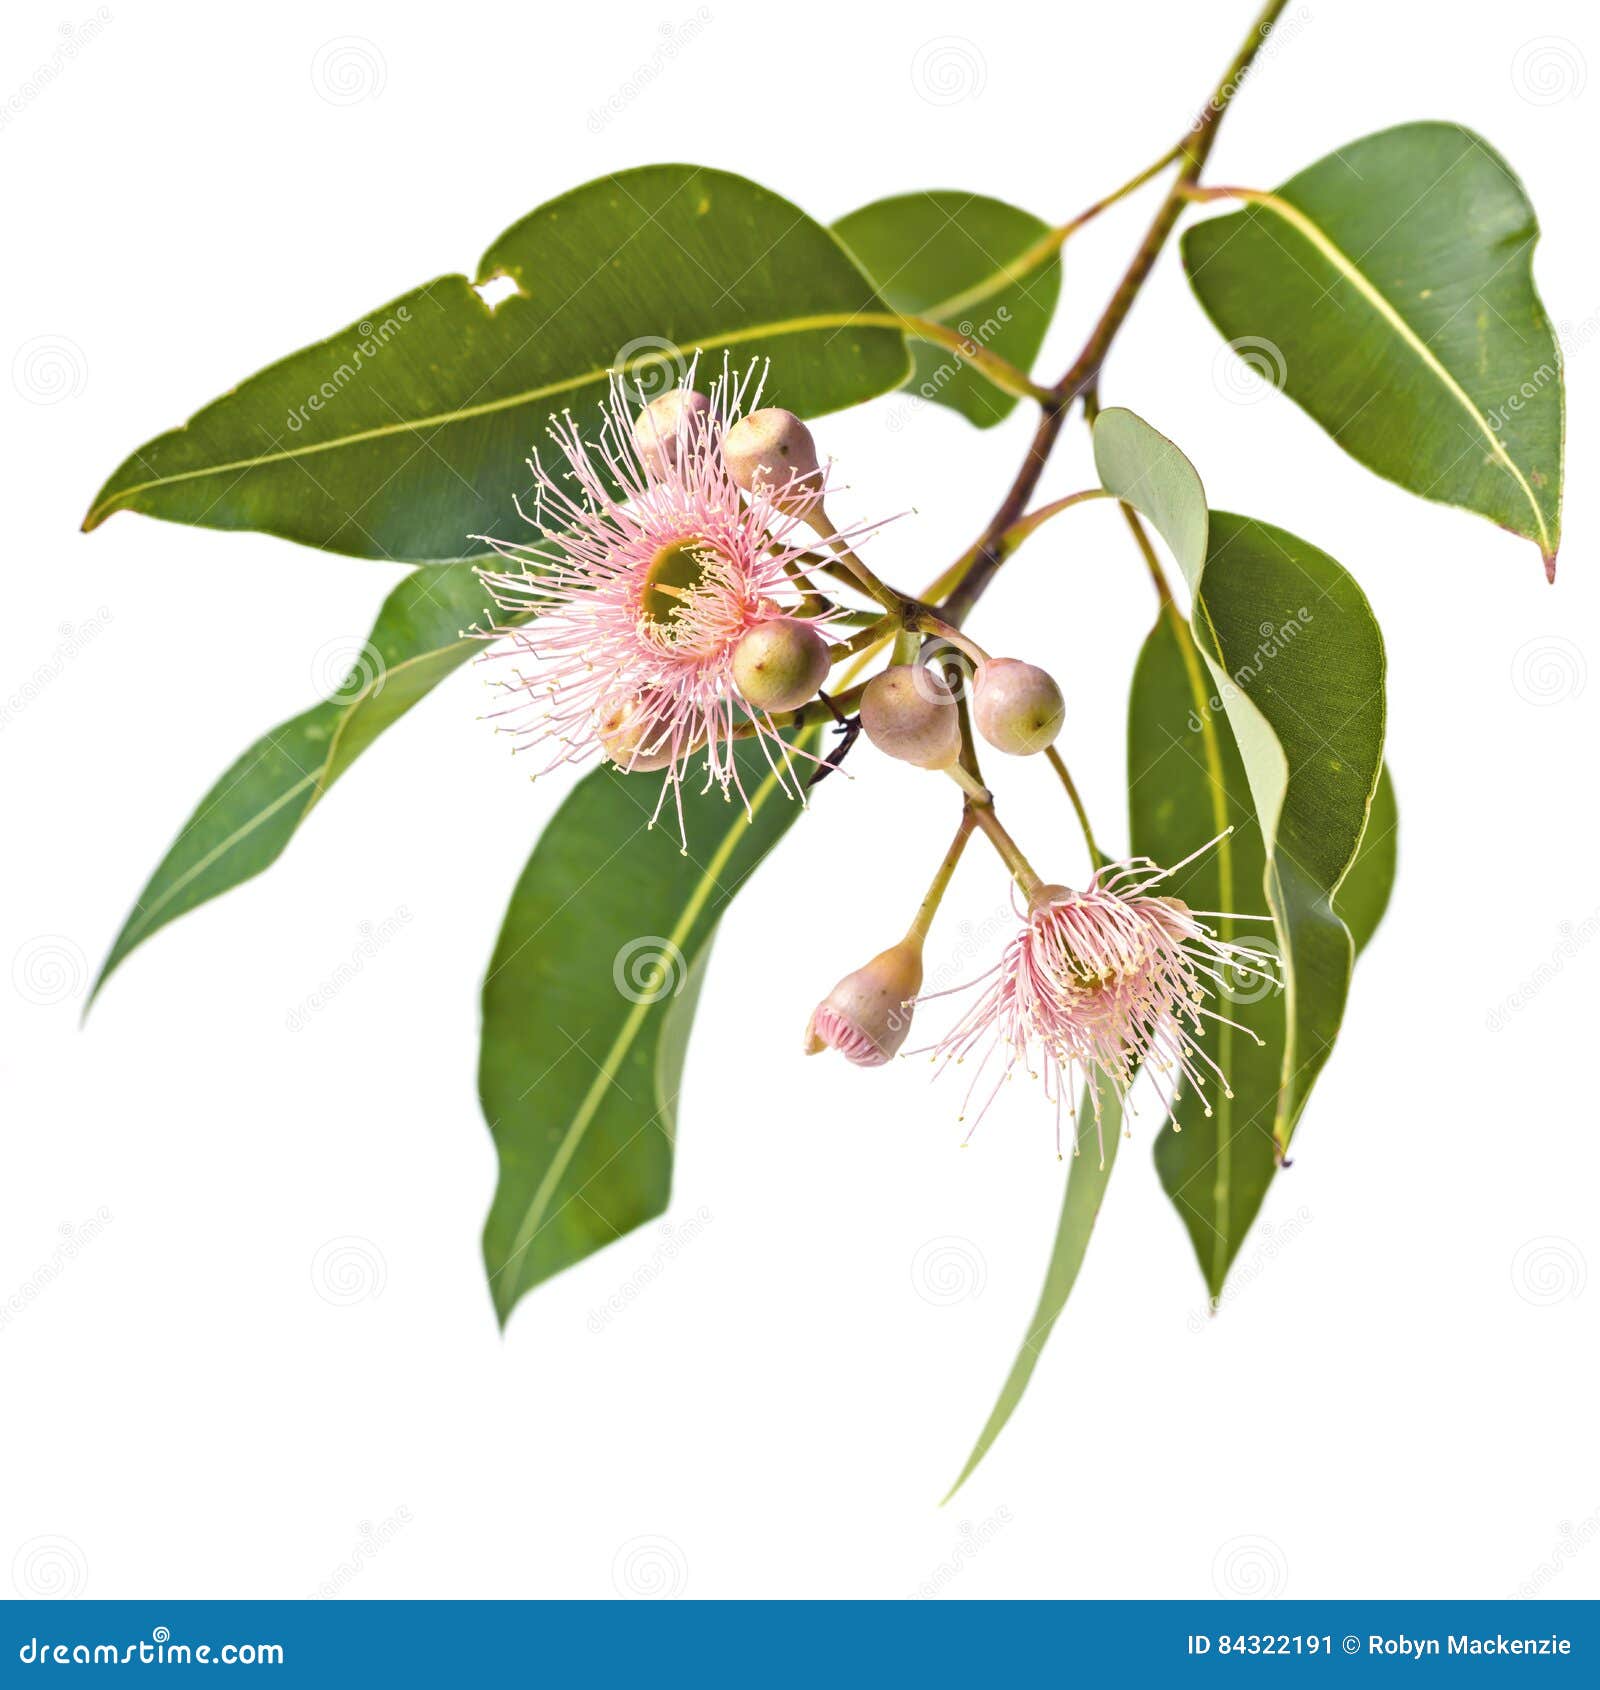 pink eucalyptus flowers buds and leaves  on white